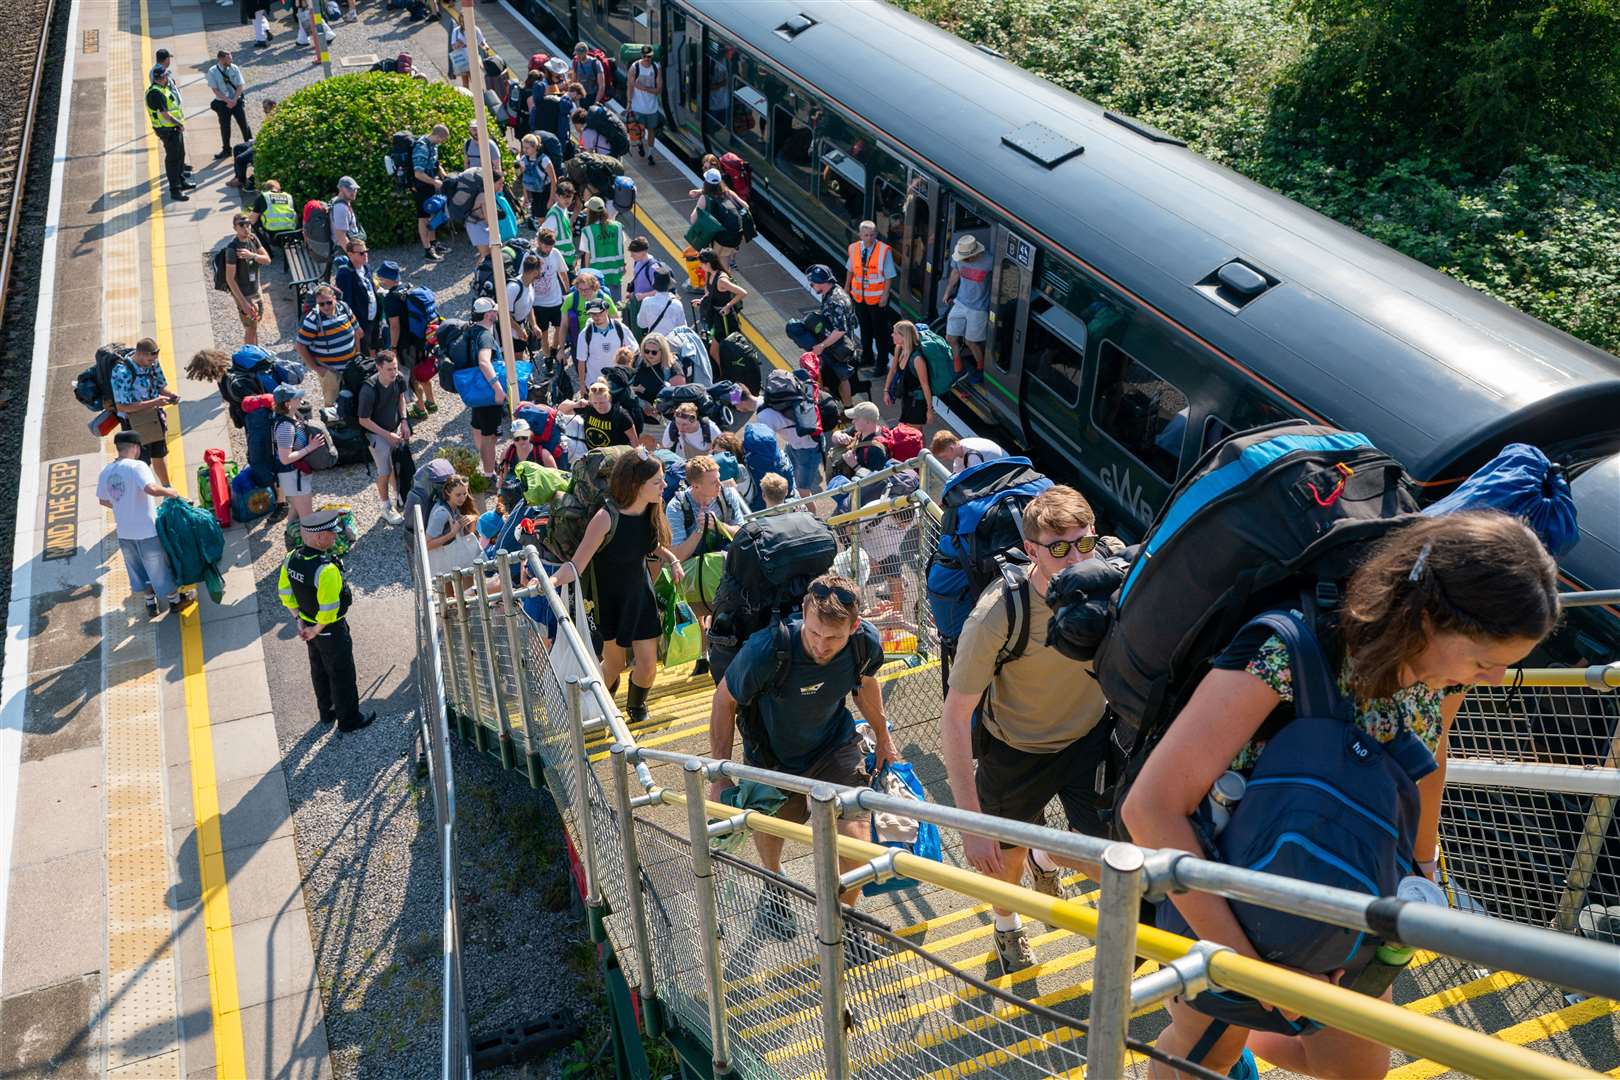 Meanwhile, in Somerset, revellers made their way out of Castle Cary train station and onto buses to shuttle them to the Glastonbury Festival site (Ben Birchall/PA)